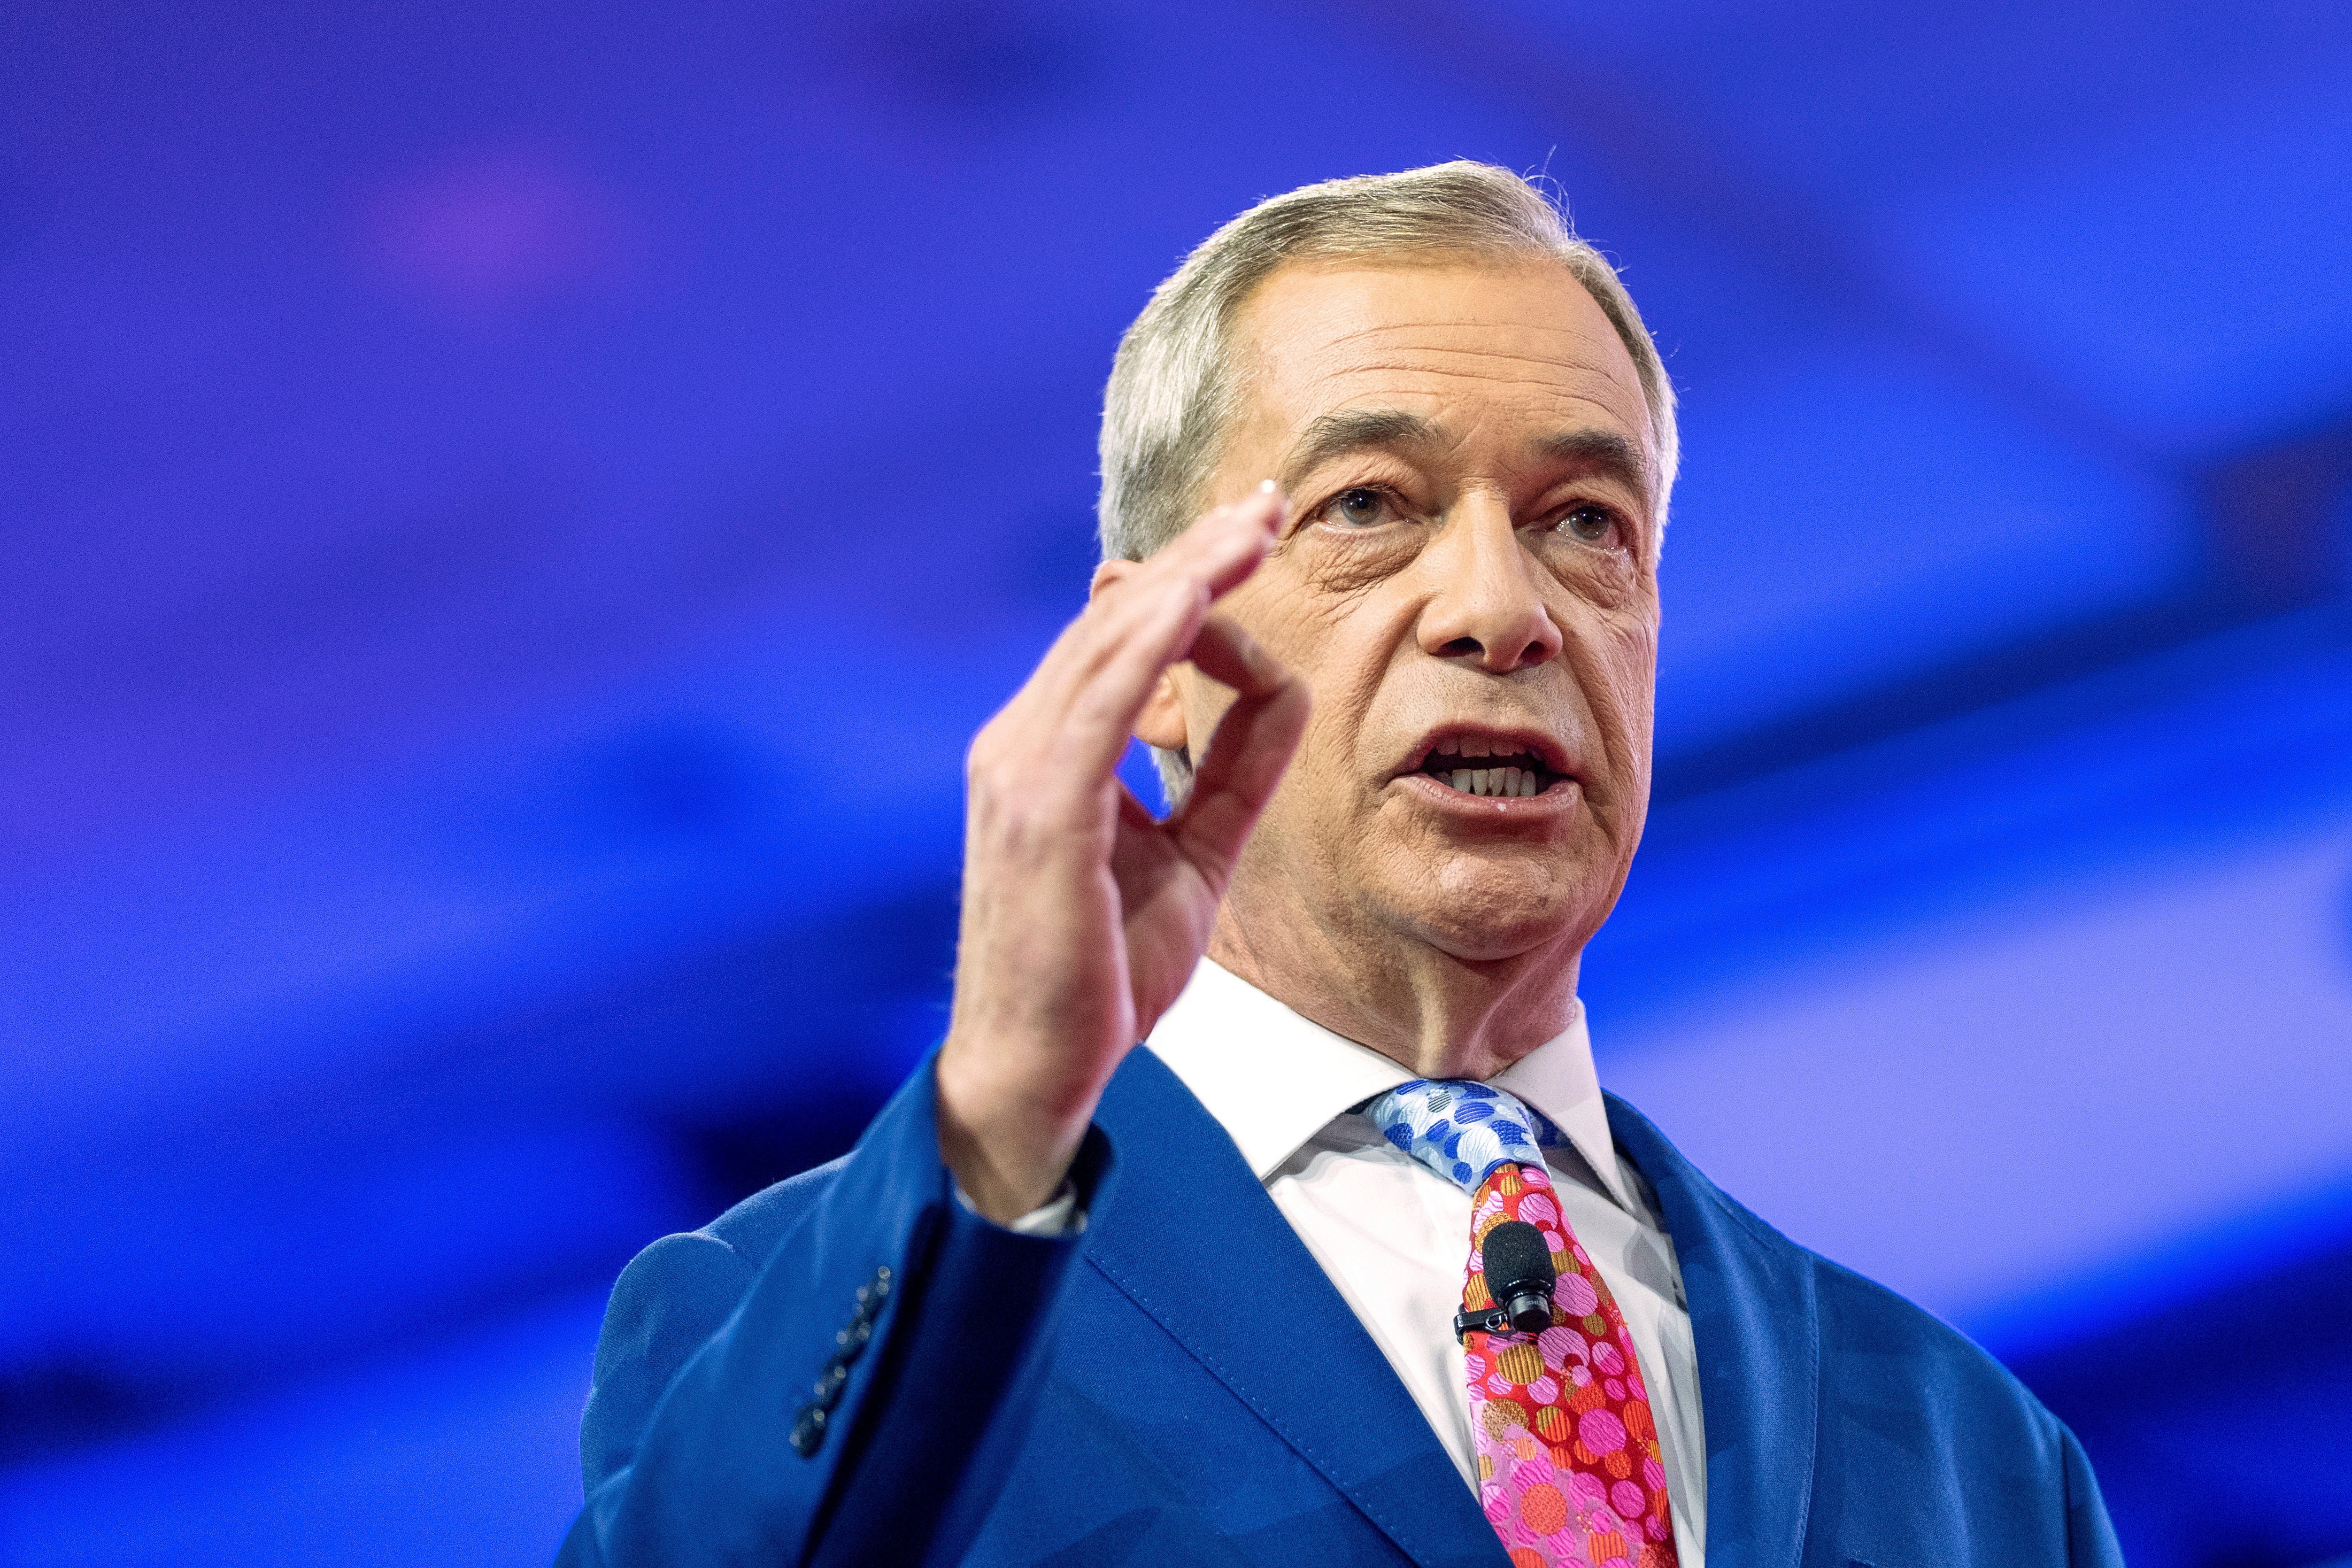 Reform UK leader Nigel Farage claimed last month during a BBC interview that the West ‘provoked’ Russia’s invasion of Ukraine